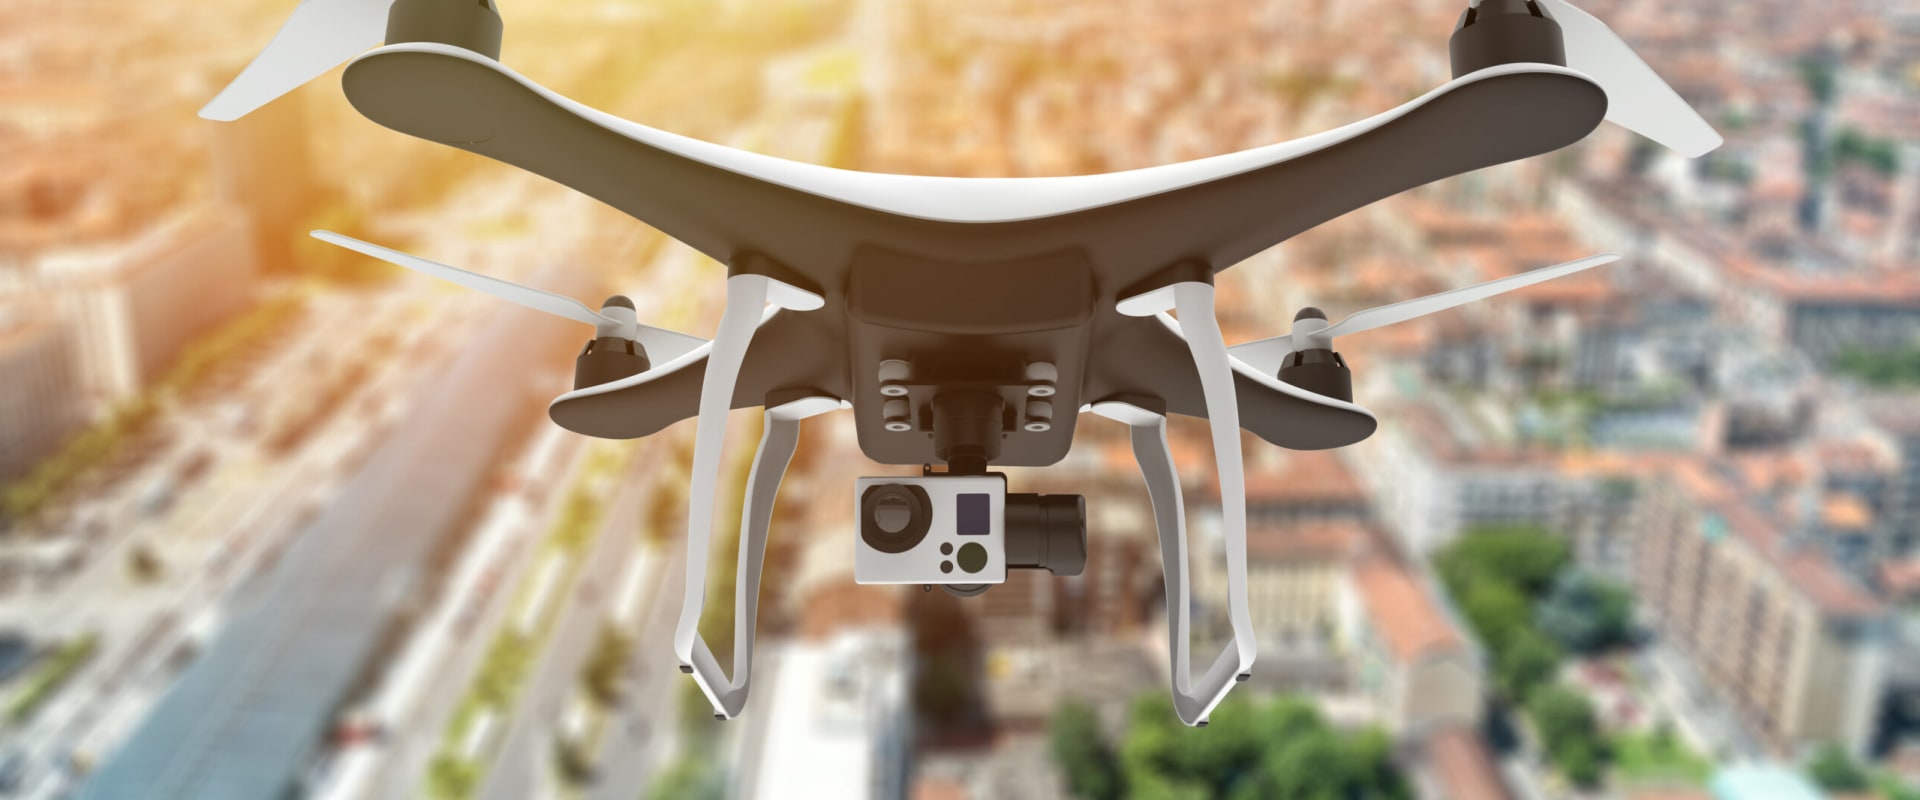 Photography and Videography: Uses and Applications of Drones in Commercial Settings